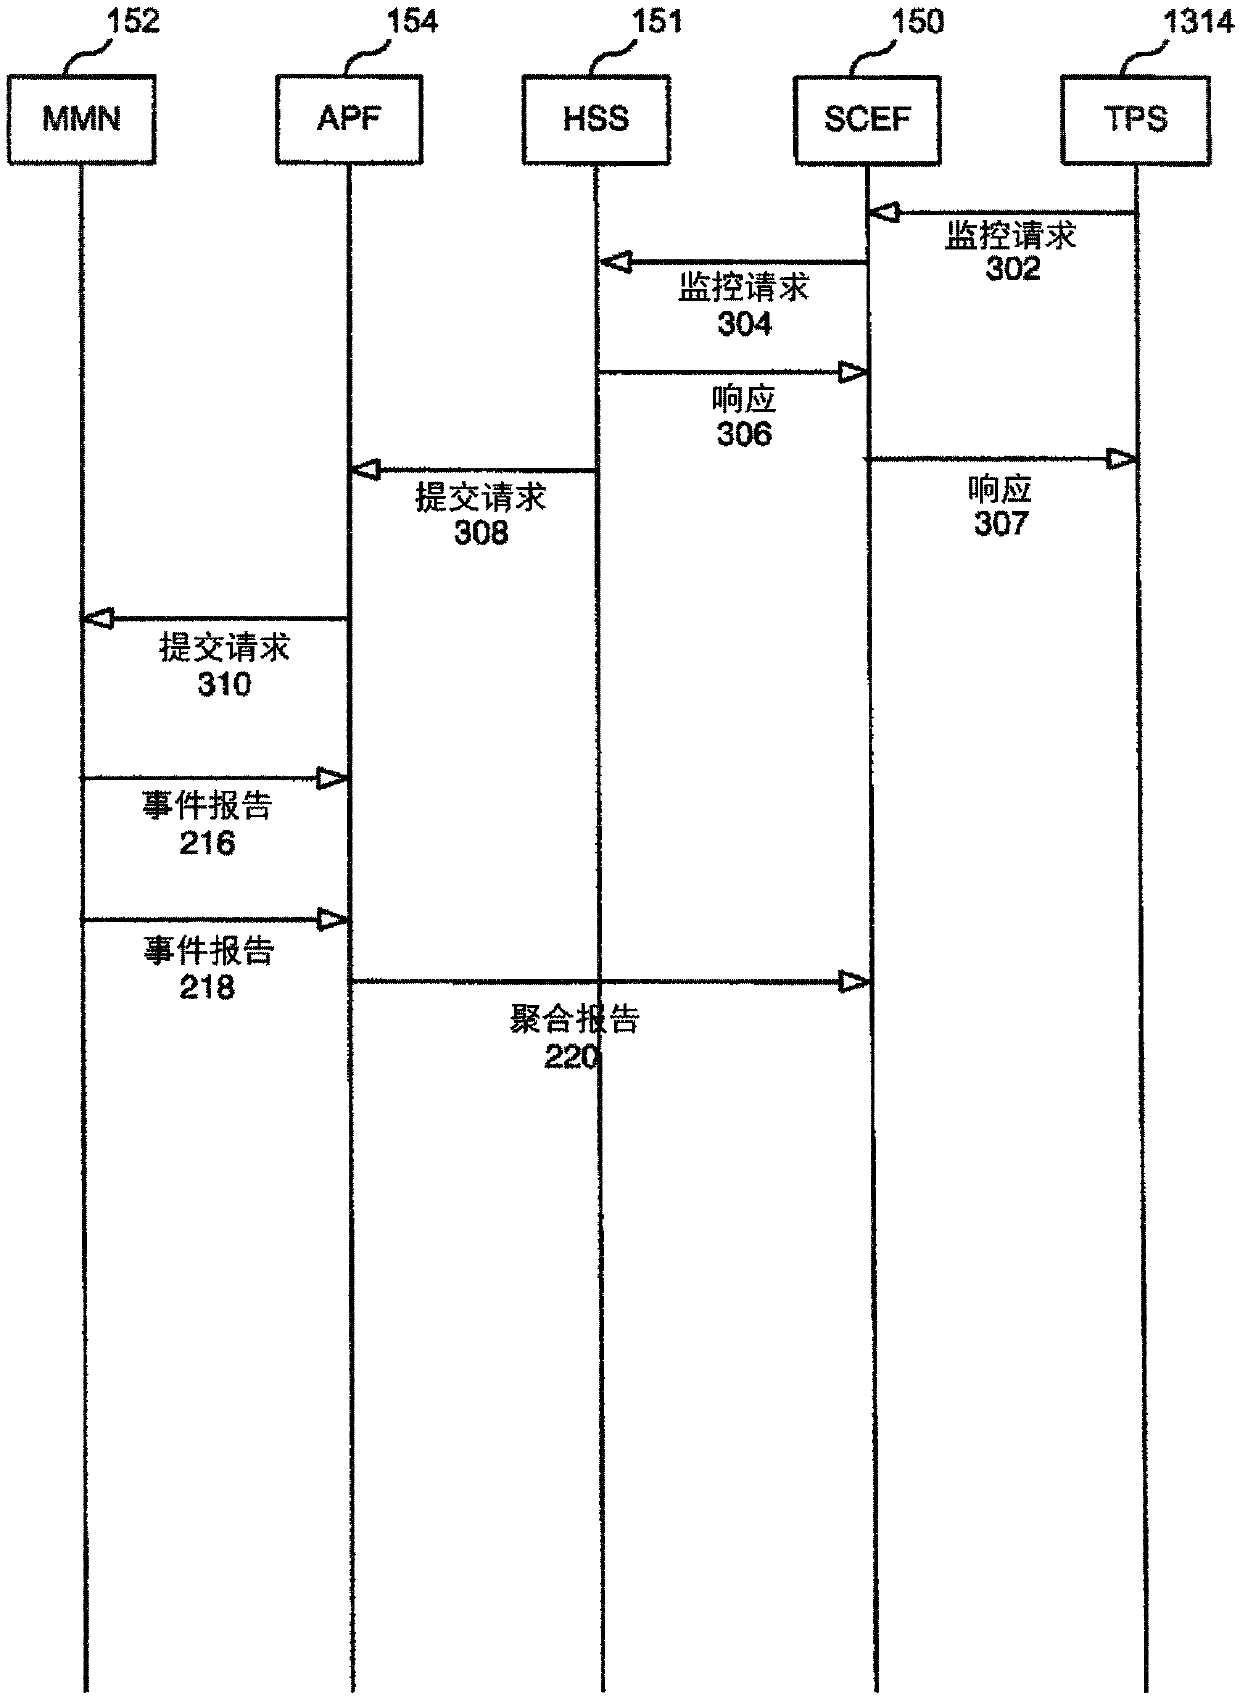 System and methods for providing monitoring services